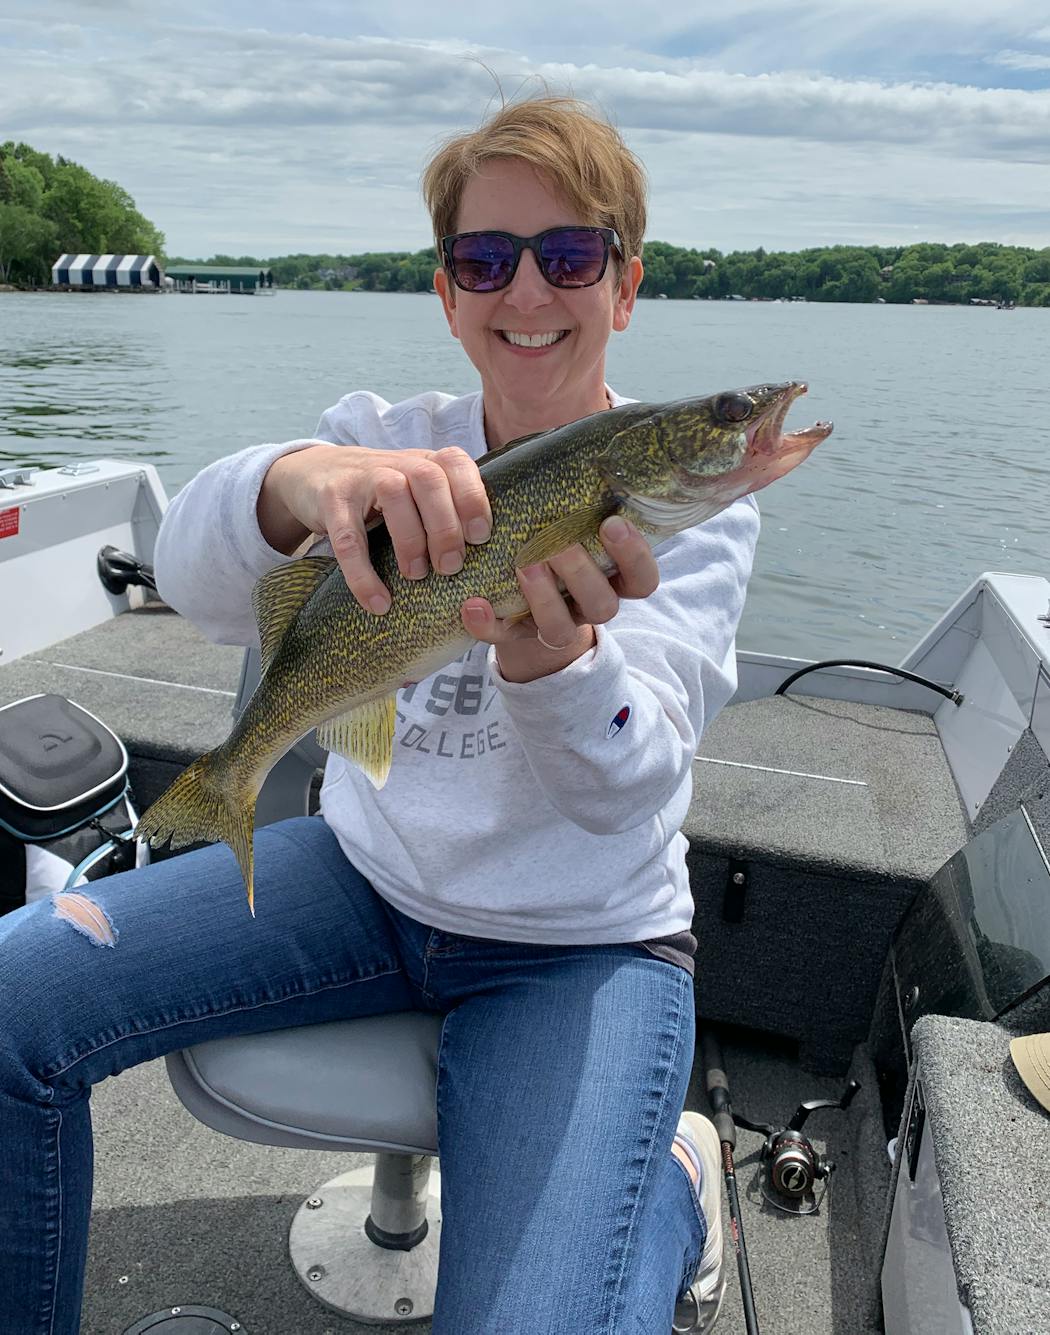 Rachel Daly held the walleye caught on the same harness, nabbed by the muskie.